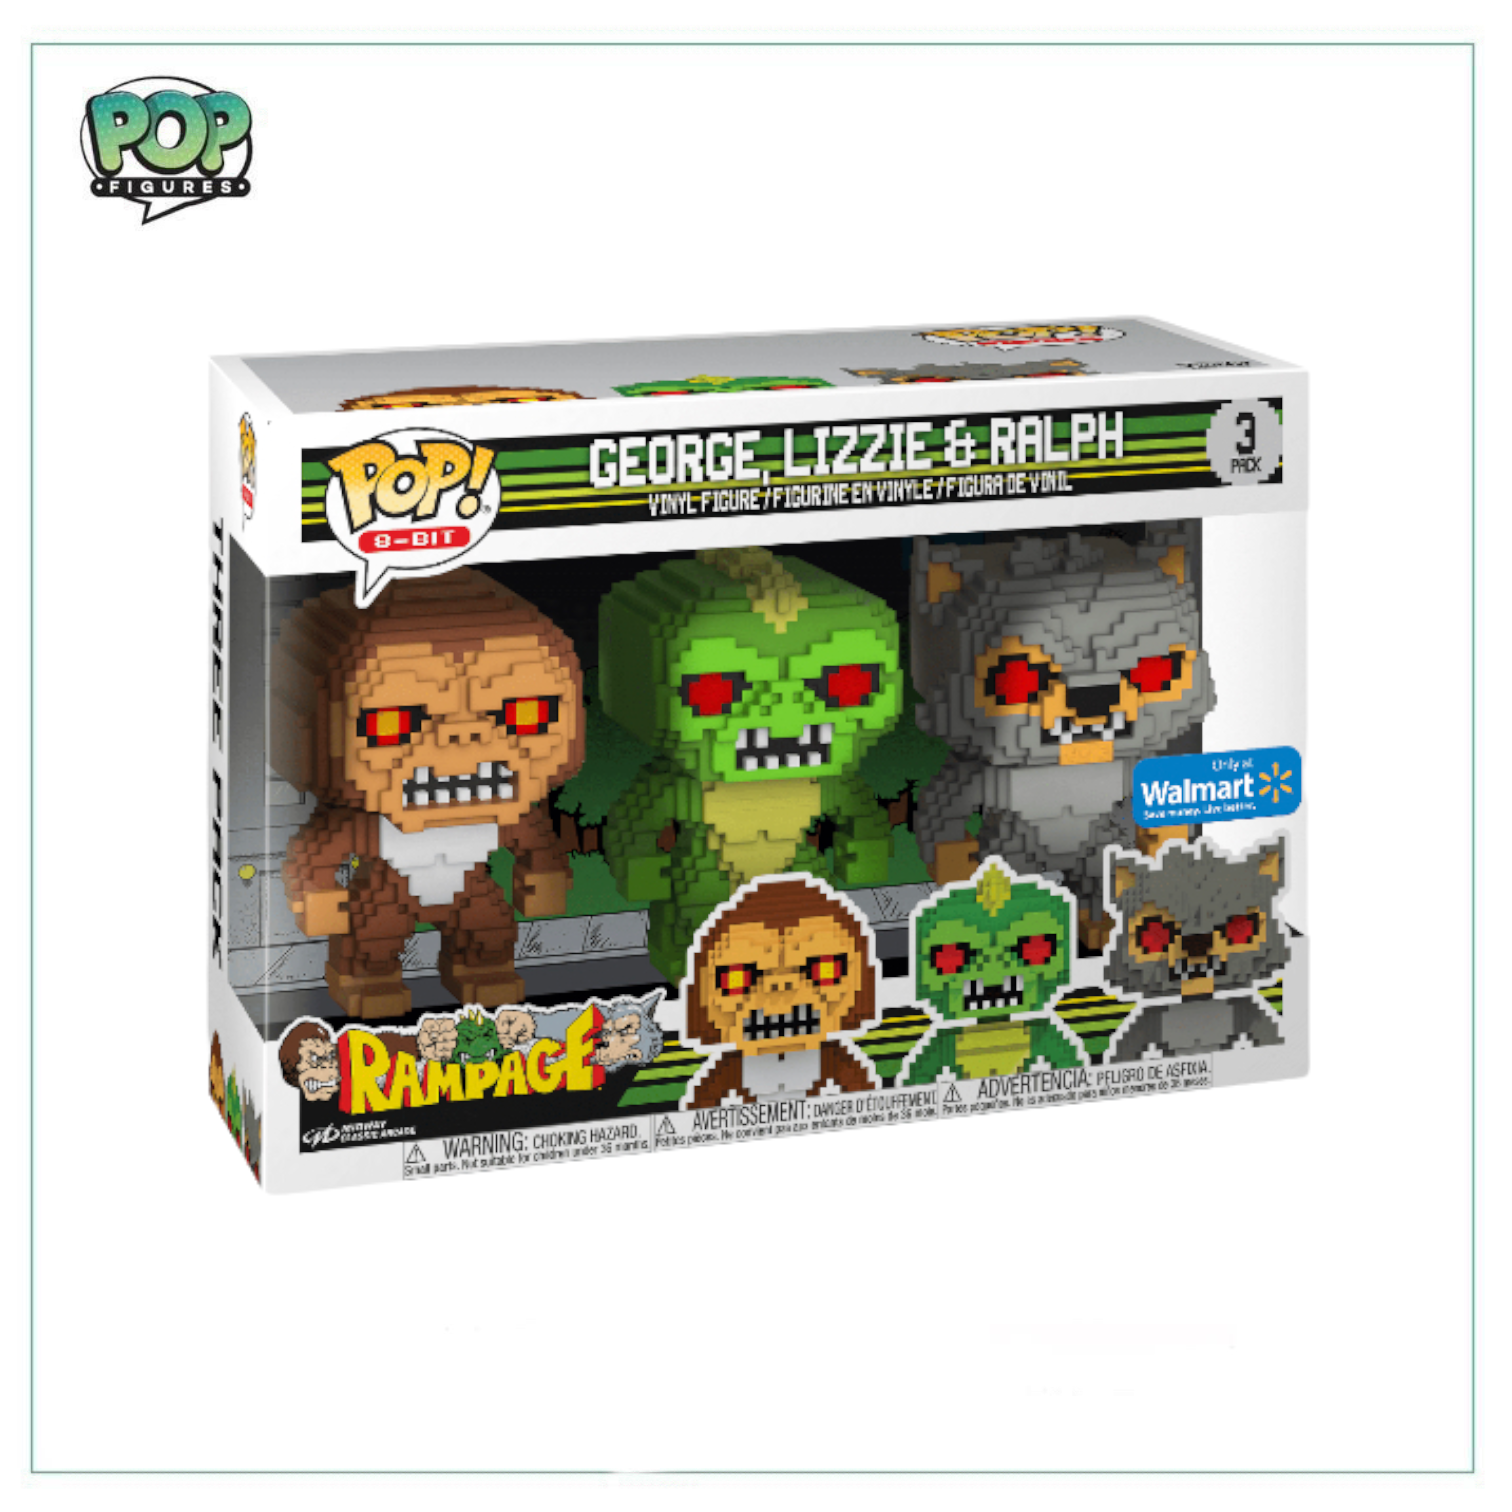 George Lizzie & Ralph Deluxe Funko 3 Pack! Rampage 8-Bit - Walmart Exclusive - Angry Cat